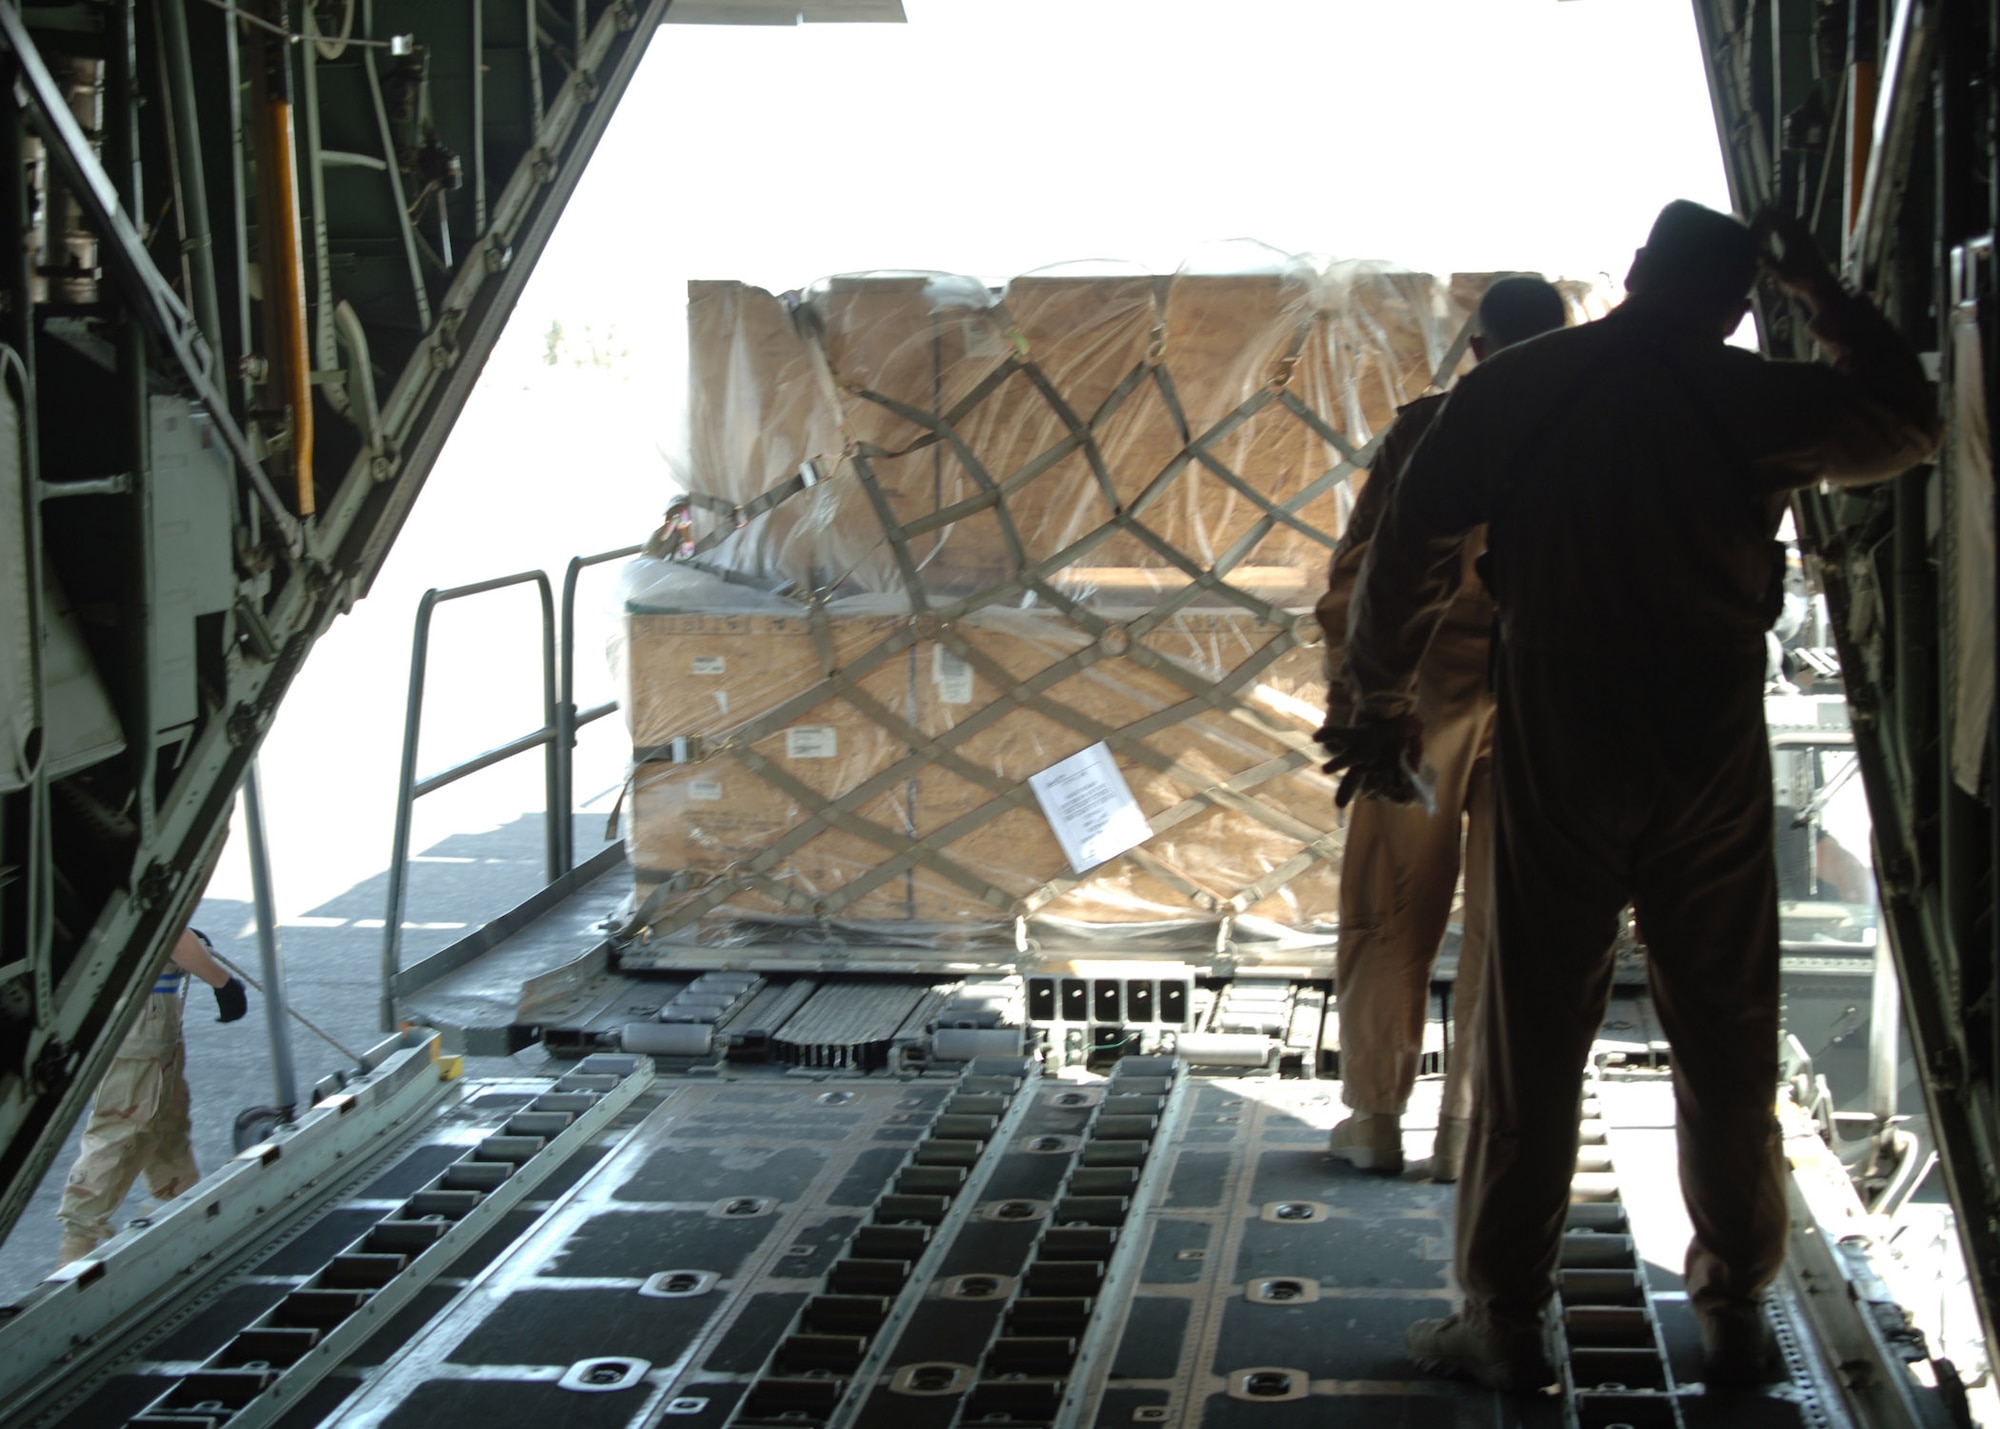 BALAD AIR BASE, Iraq - An Iraqi Air Force air crewman and U.S. Air Force Master Sgt. John Gahan, who serves with the Coalition Air Force Transition Team, secure pallets of humanitarian relief supplies for delivery to Iraqi citizens victimized in a vehicle-borne improvised explosive device attack March 27 that killed 80 Iraqis, wounded 140 more and destroyed more than 20 homes. The food, tents and other humanitarian supplies are being flown to Tal Afar on an Iraqi Air Force C-130 Hercules today. (U.S. Air Force photo/Capt. Ken Hall)